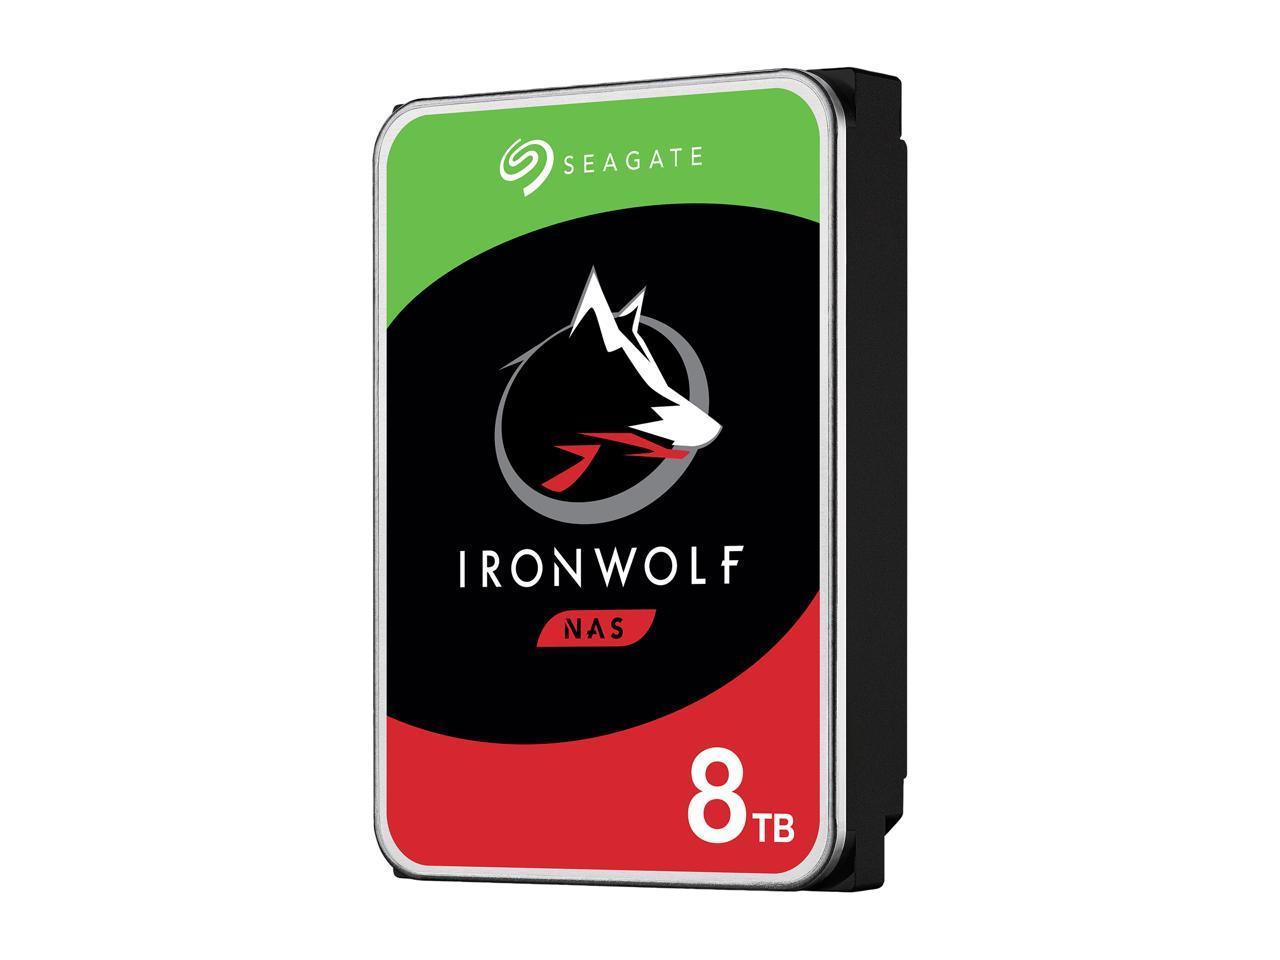 Хард диск SEAGATE IronWolf ST8000VN004, 8TB, 256MB Cache, SATA 6.0Gb/s-2